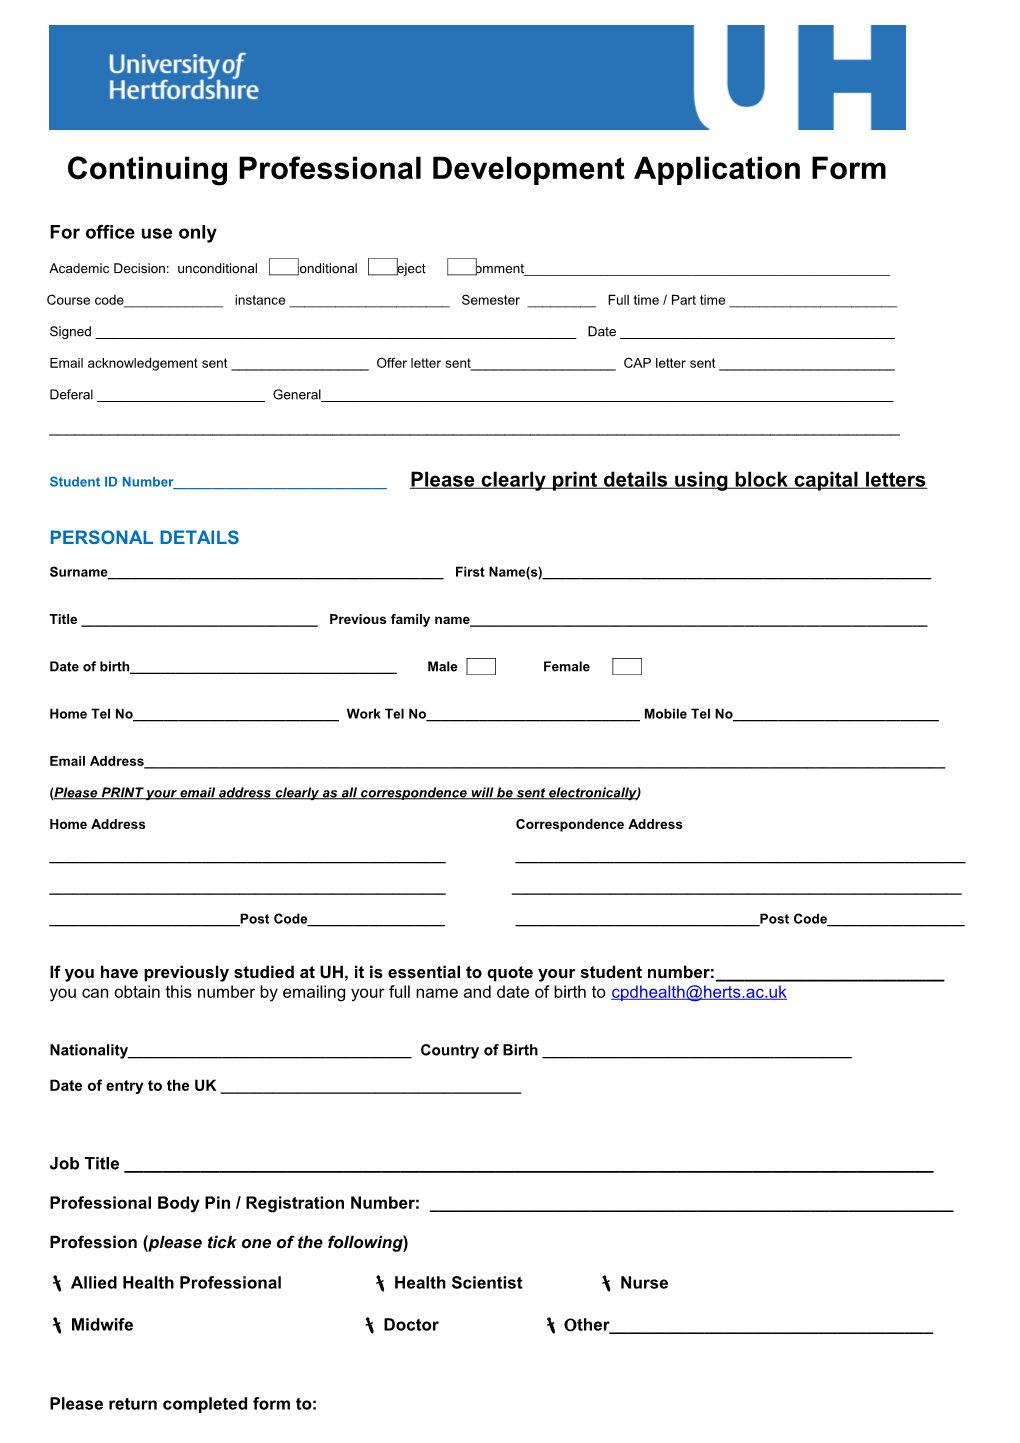 CPD - Application Form